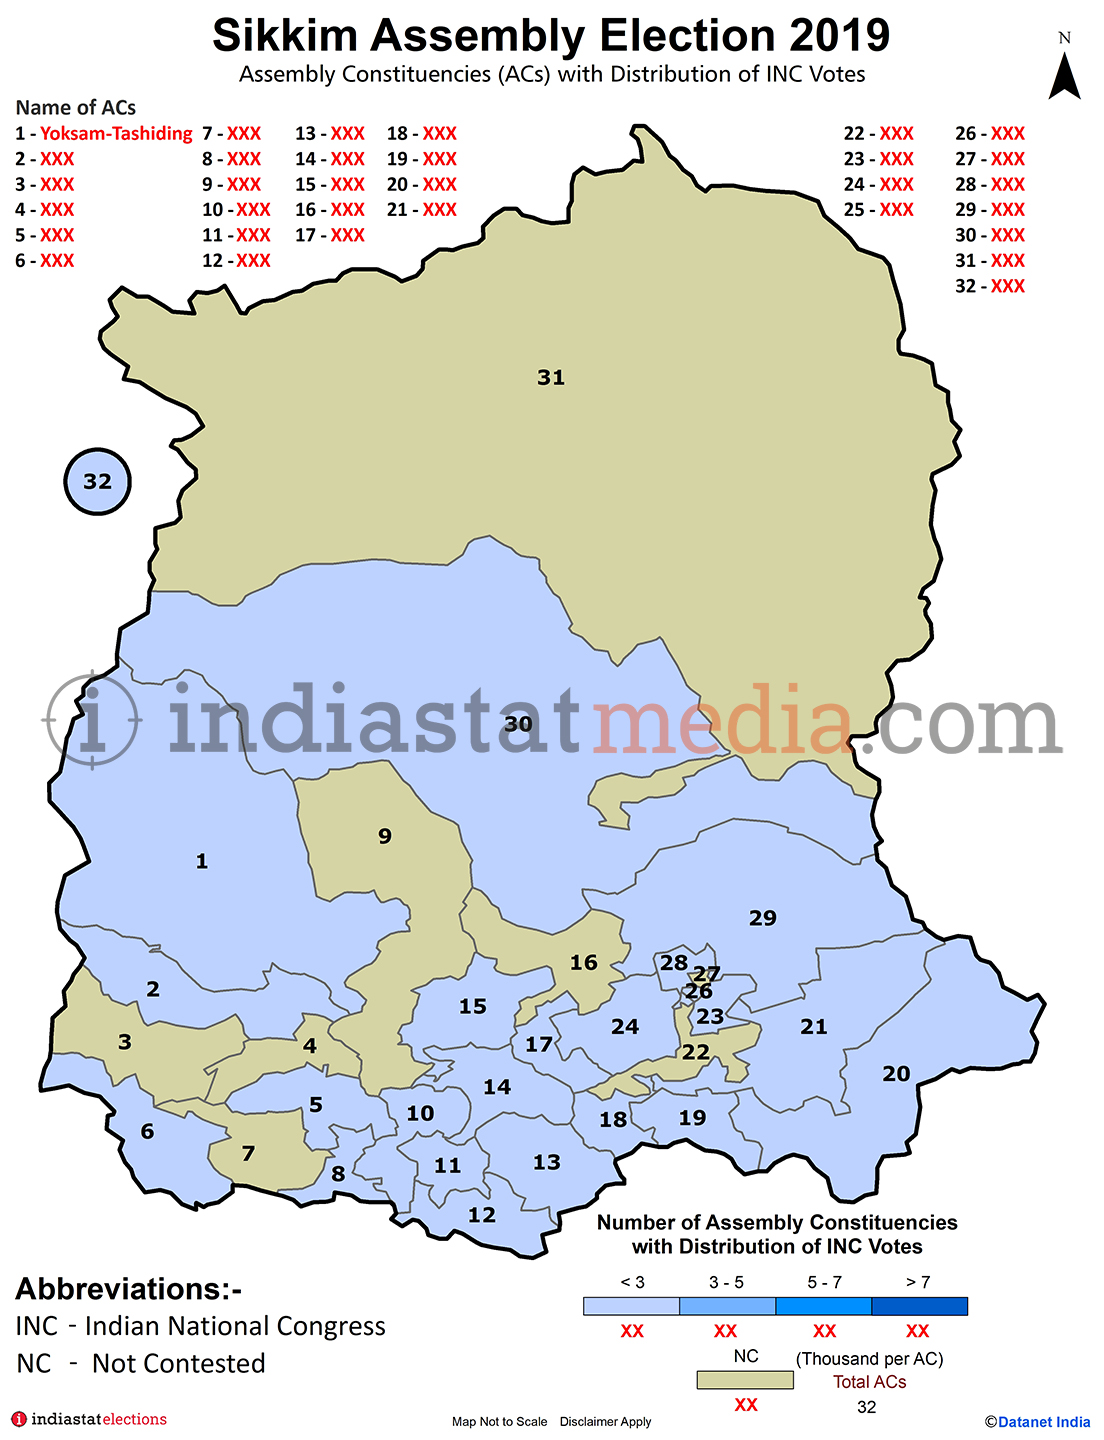 Distribution of INC Votes by Constituencies in Sikkim (Assembly Election - 2019)